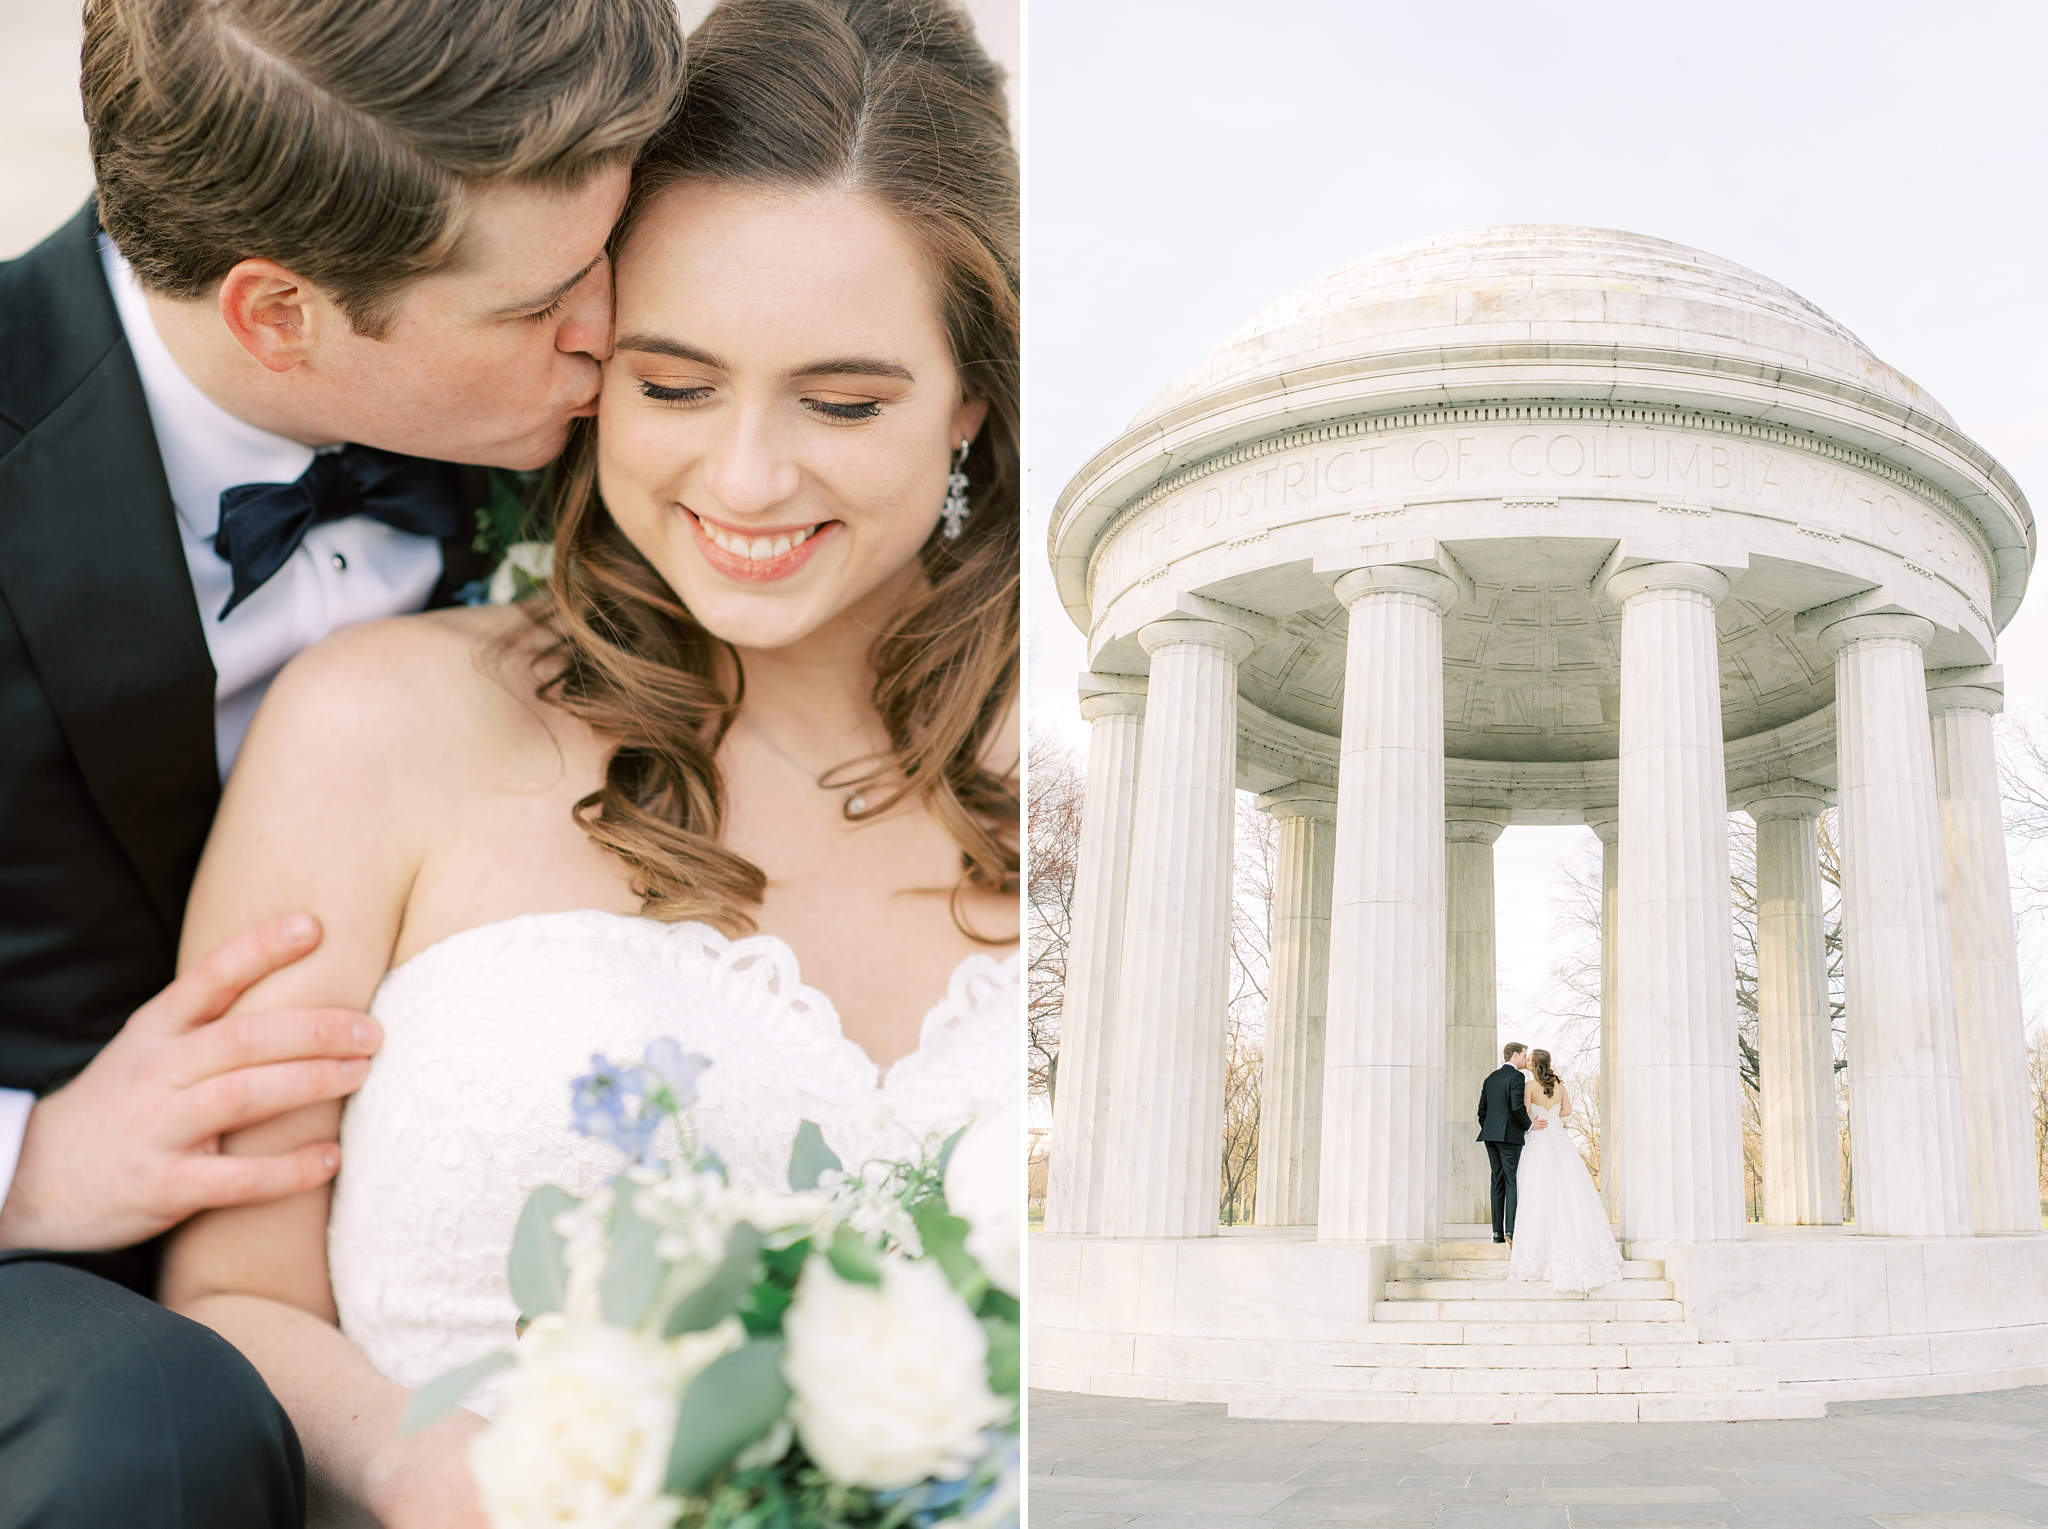 This Washington, DC wedding photographer reviews the highlights of her wedding and elopments throughout the 2020 season.